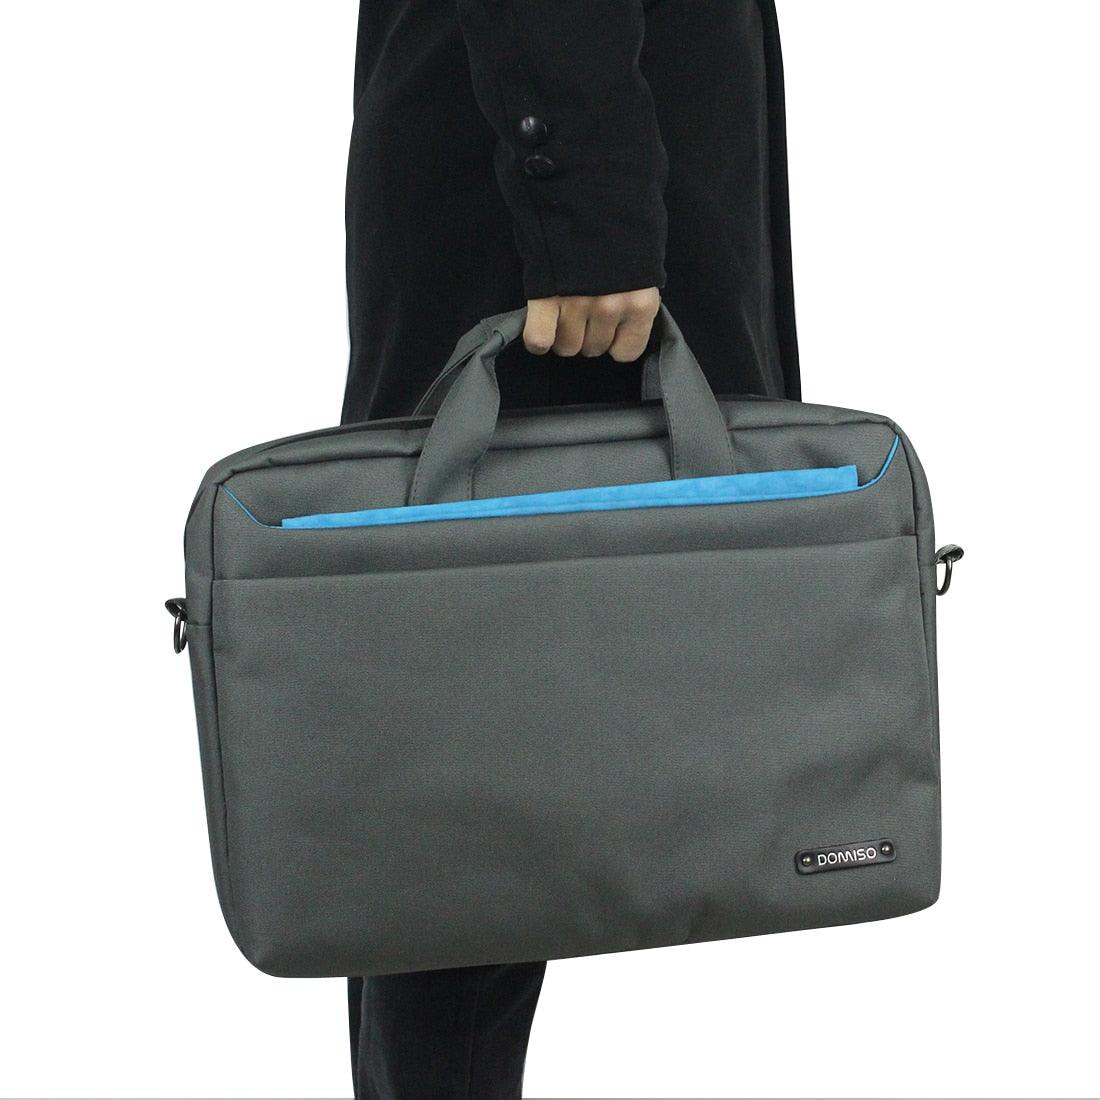 15.6 Inches Water Resistant Laptop Shoulder Bag Sleeve Carry Case for All Occasions School Business or Travel Grey (CA4)